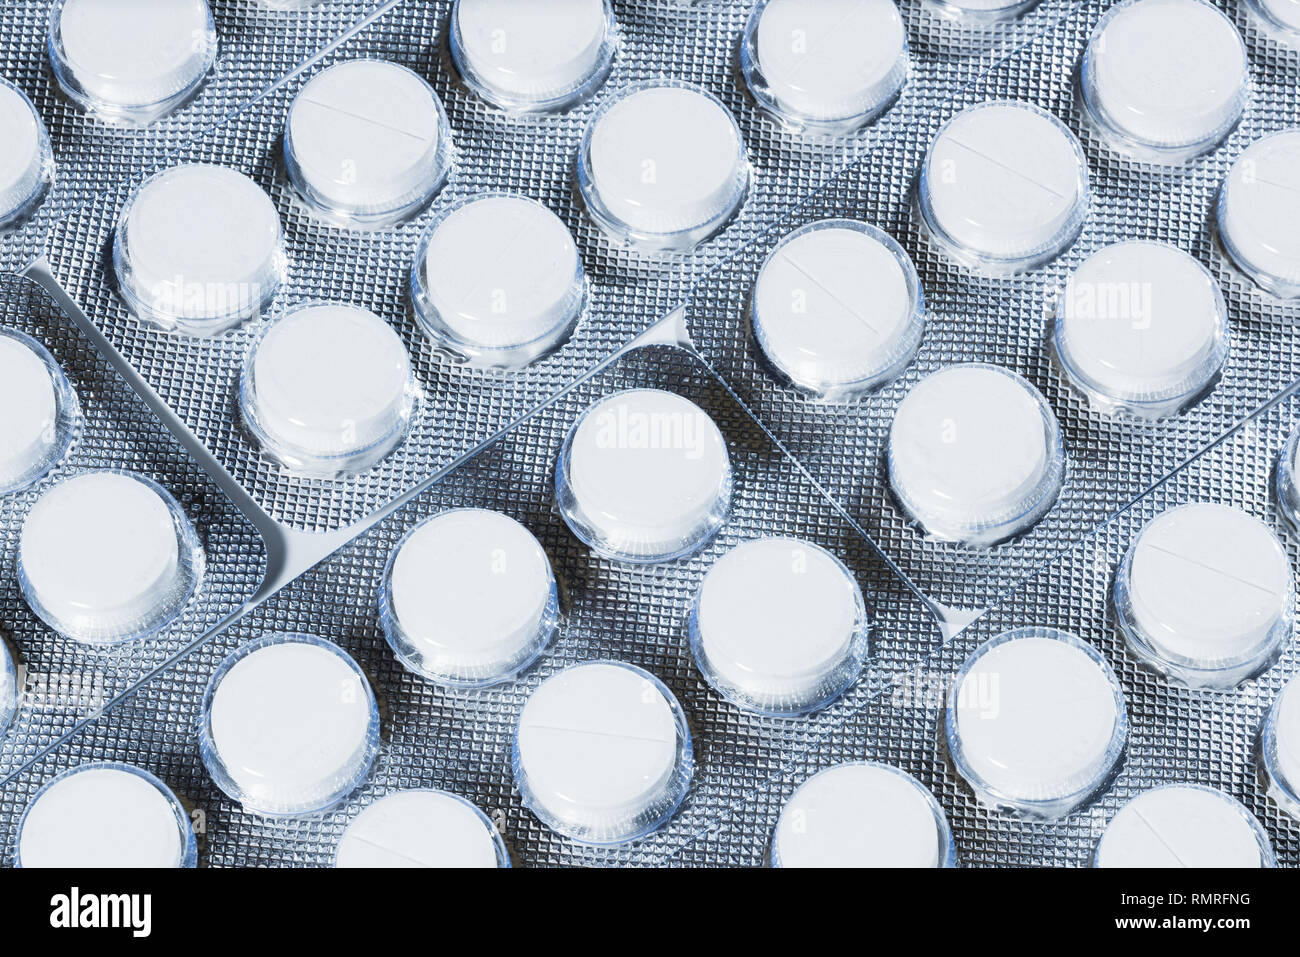 White pills in silver packaging on a white background. Stock Photo